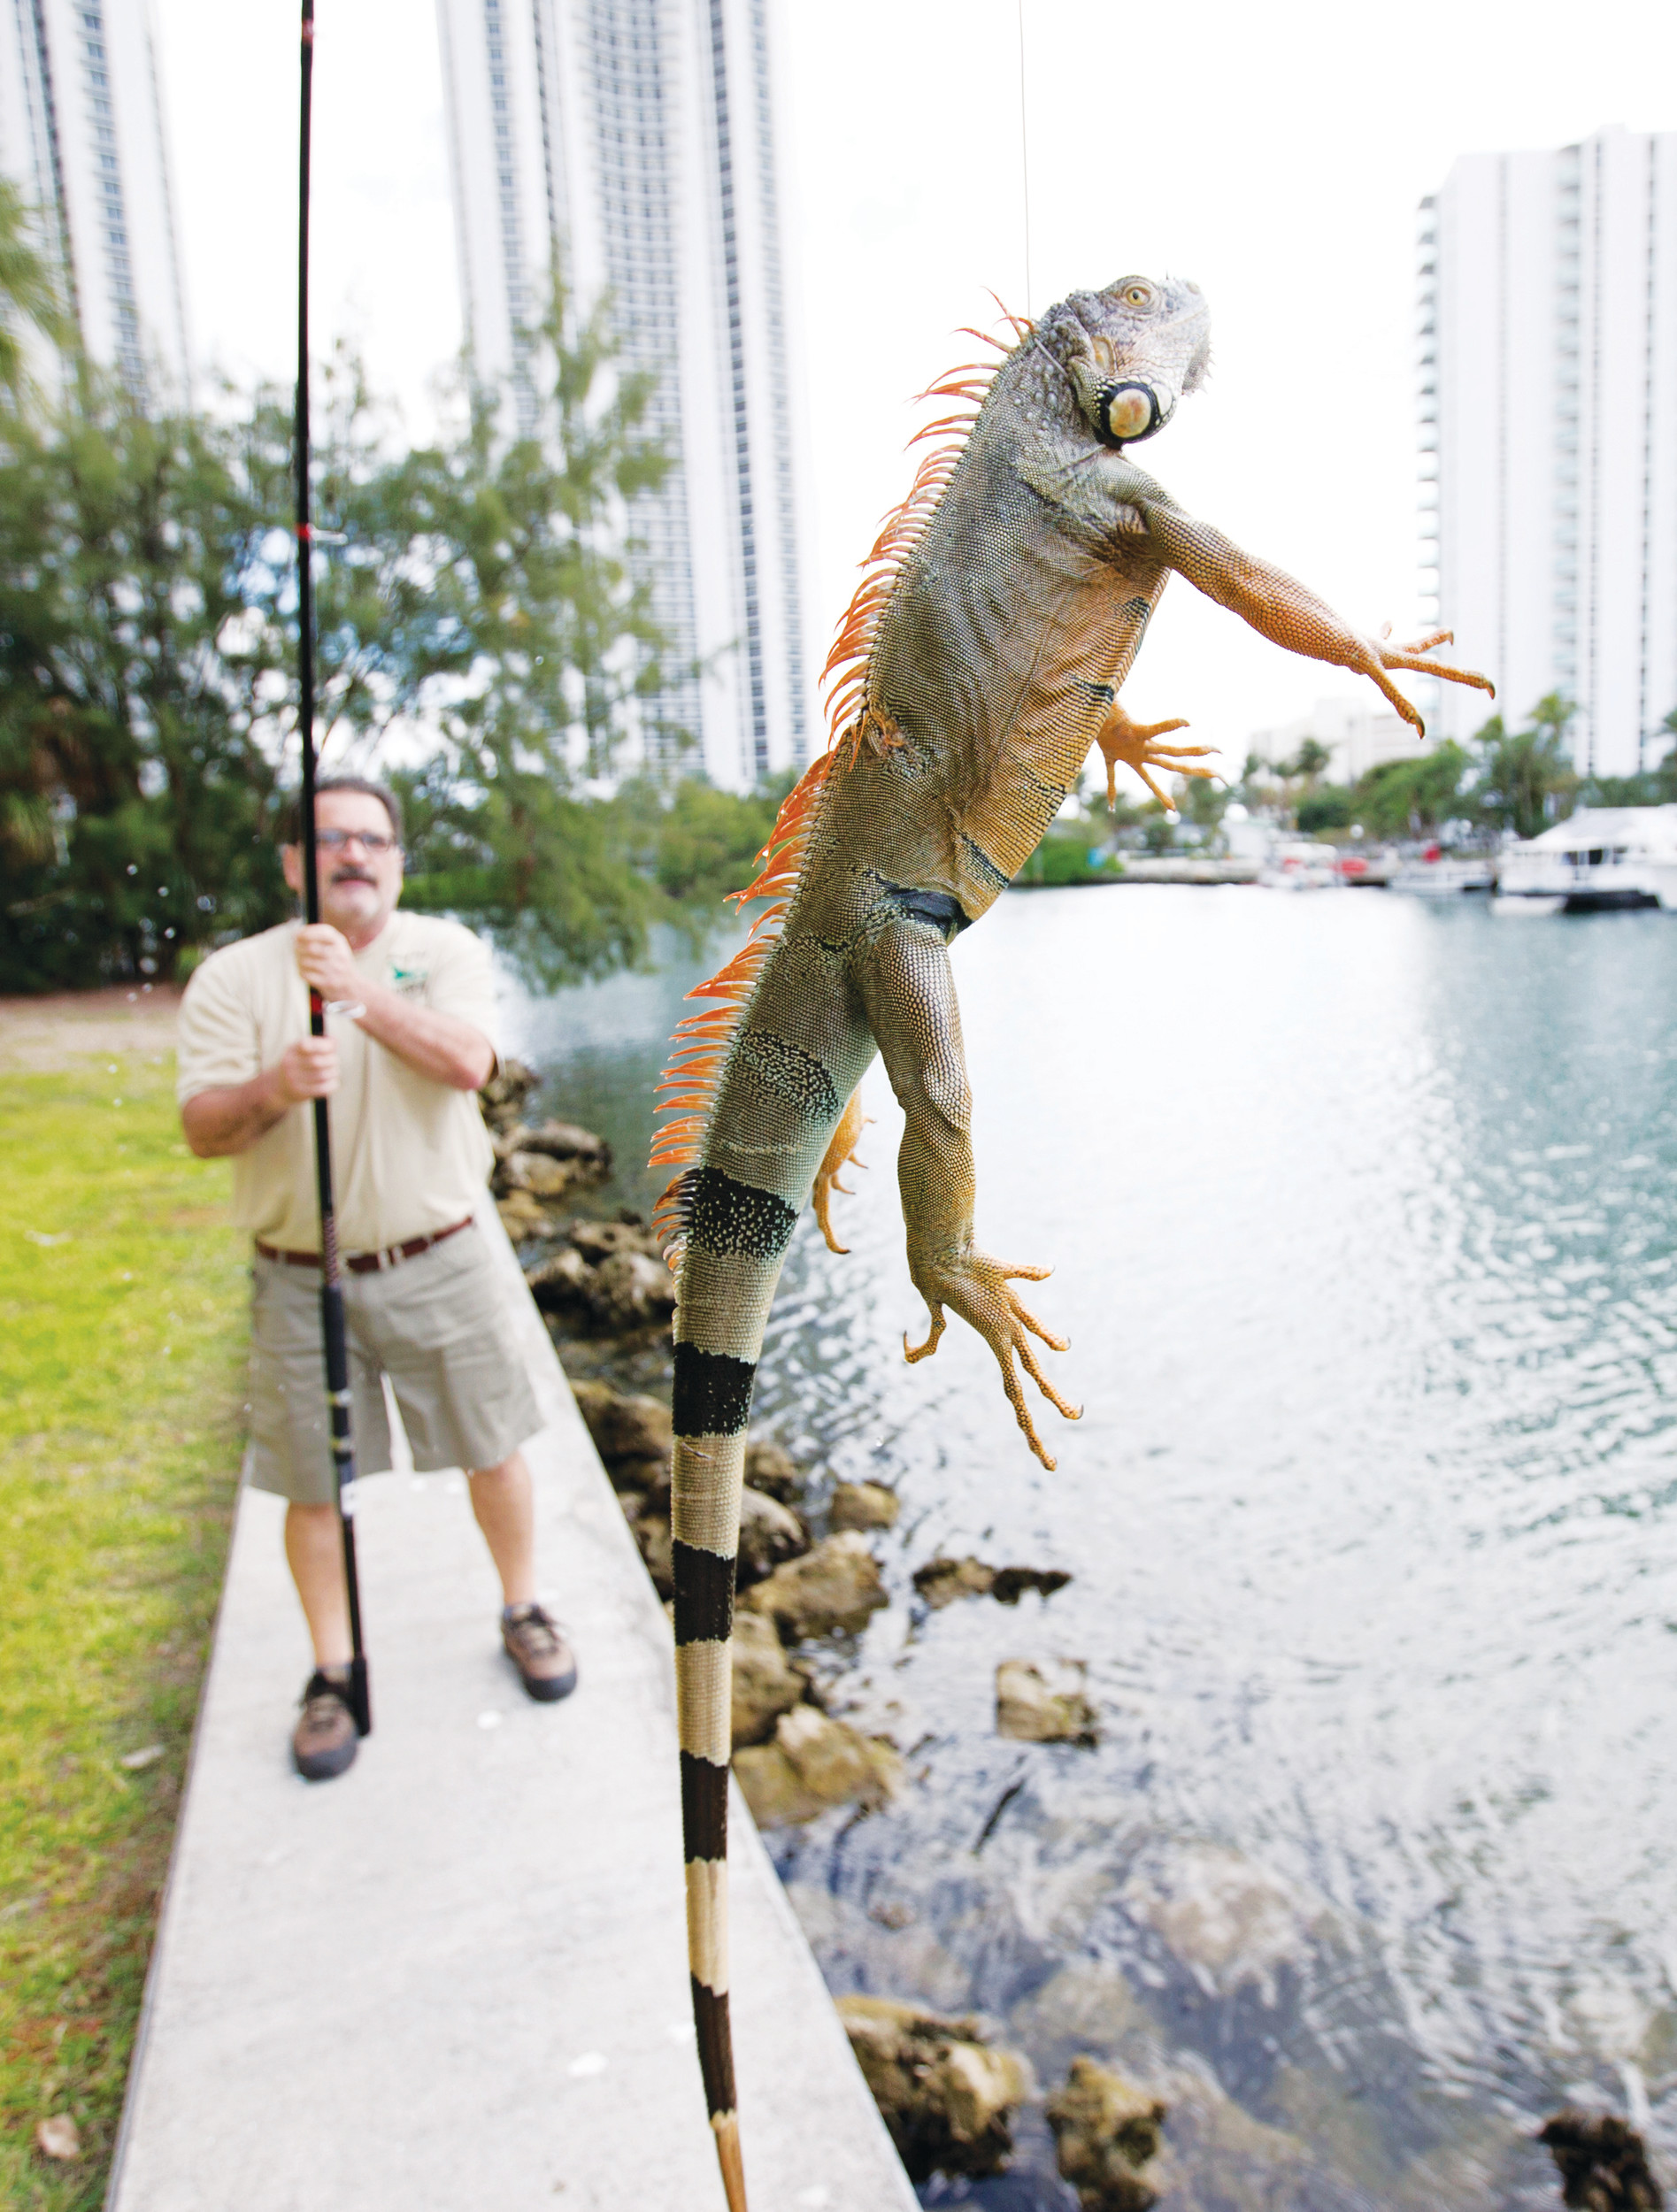 In South Florida, green iguanas spread into suburban scourge | The Sumter Item